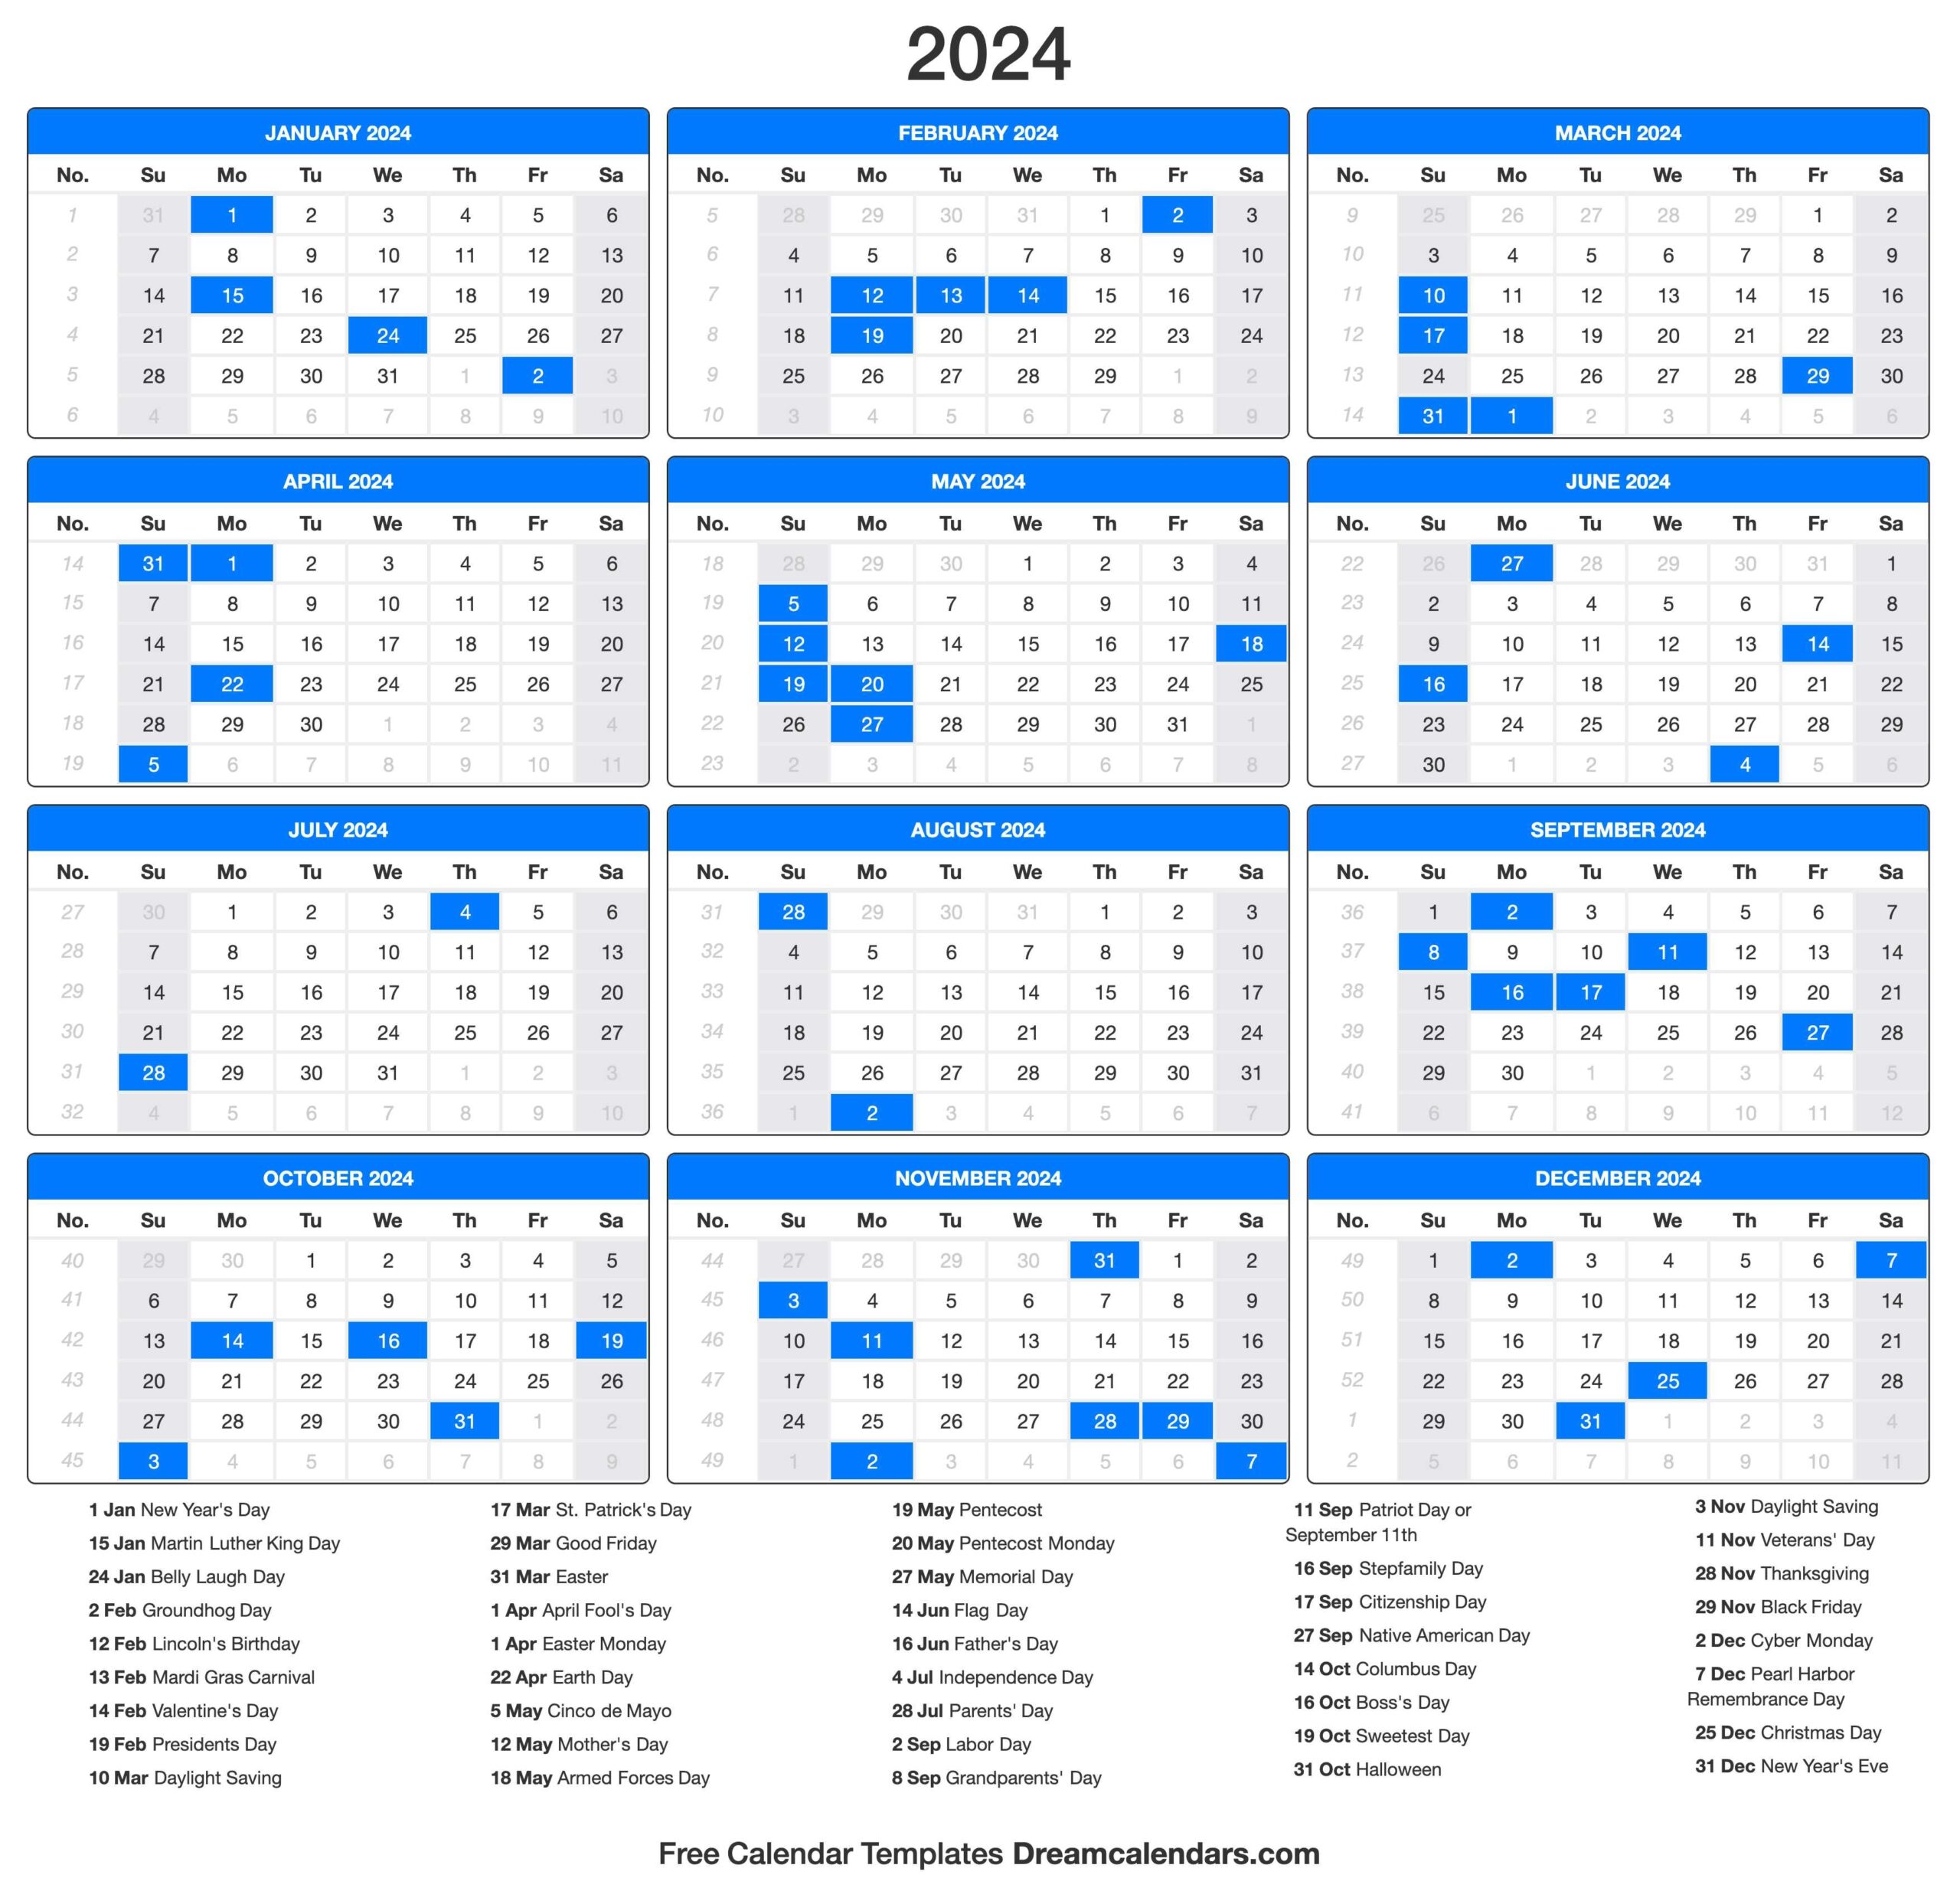 2024 Calendar - Free Printable 2024 Calendar By Month With Holidays